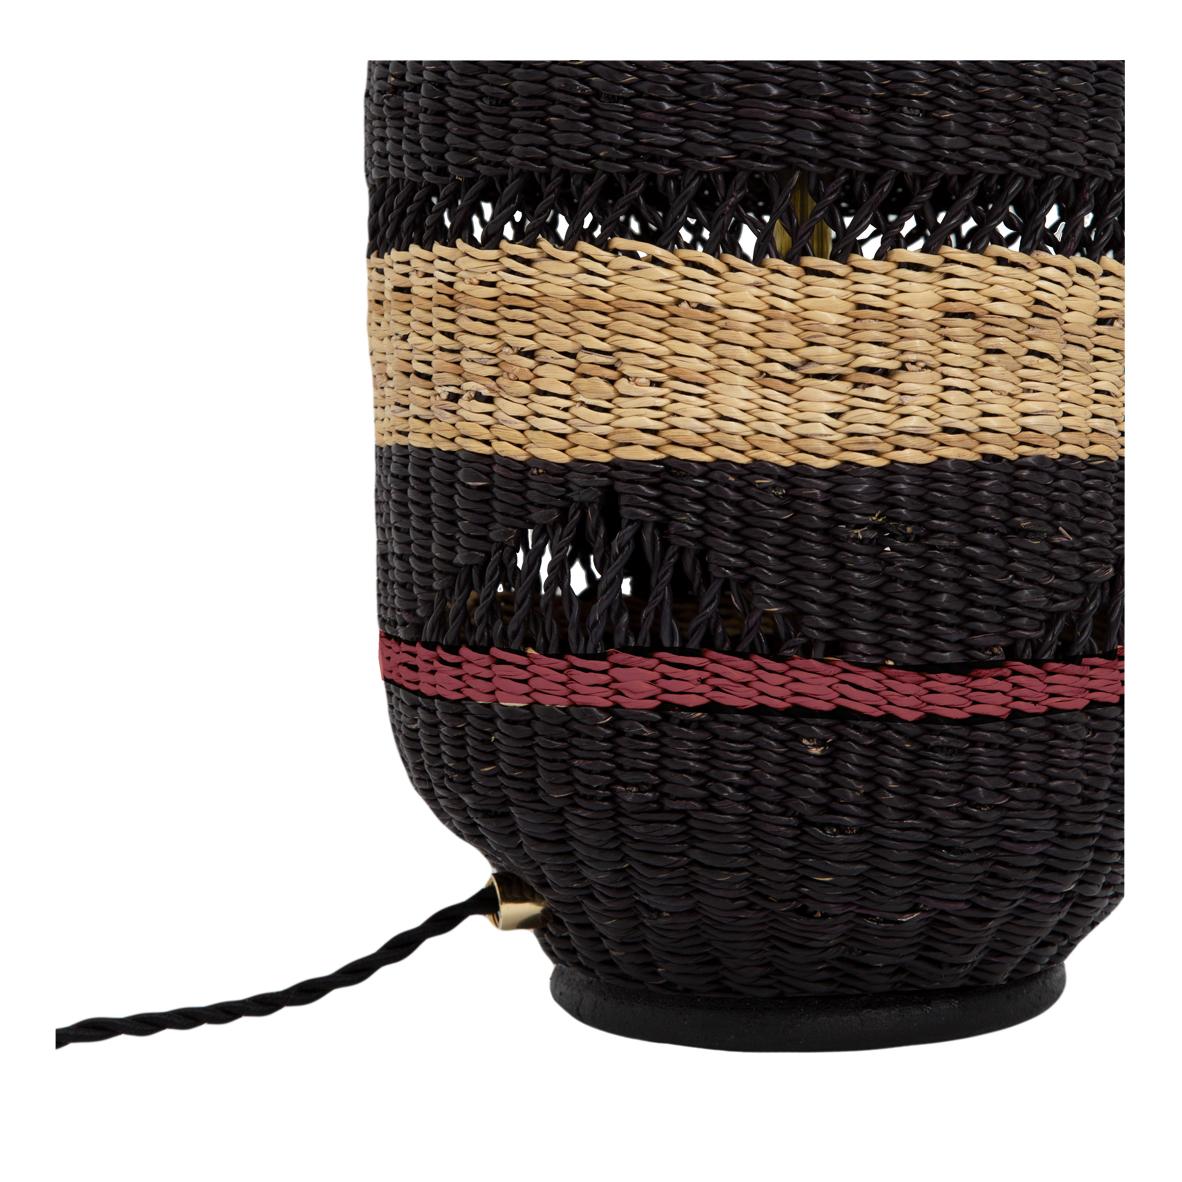 Hand-Woven Contemporary Ethnic Table Lamp Striped Handwoven Straw Black Terracotta